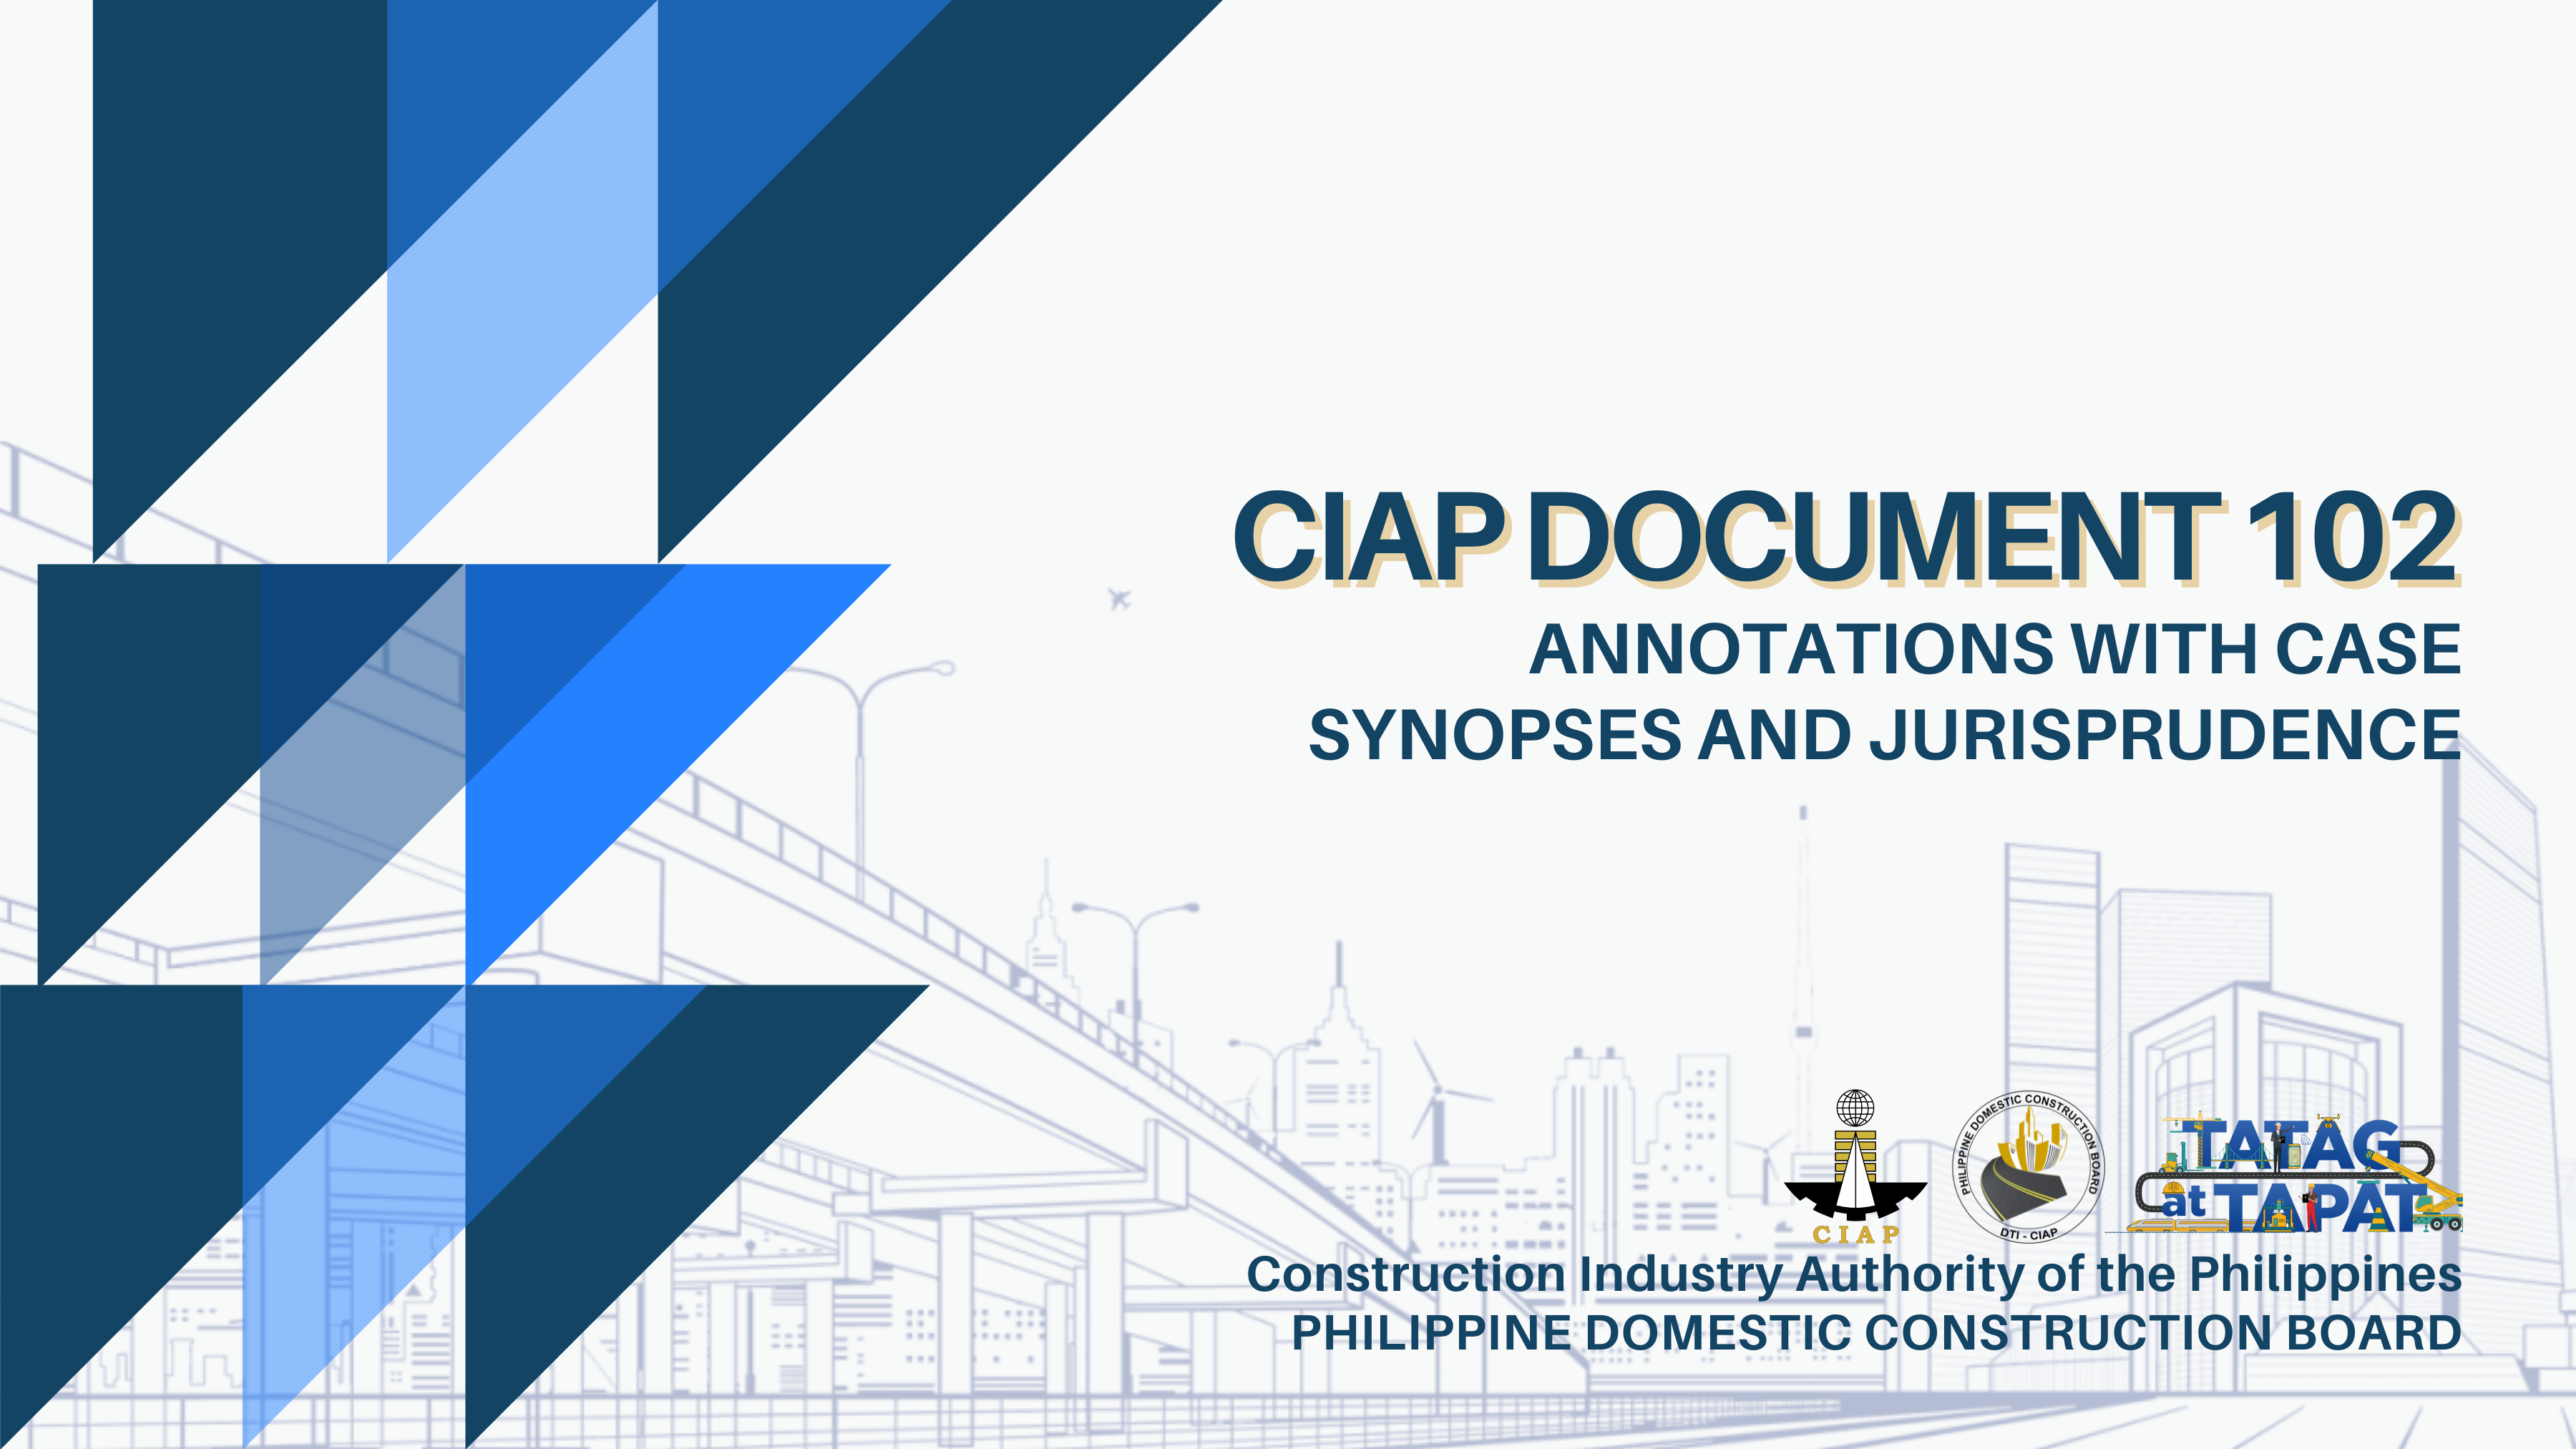 CIAP DOCUMENT 102: ANNOTATIONS WITH CASE SYNOPSES AND JURISPRUDENCE